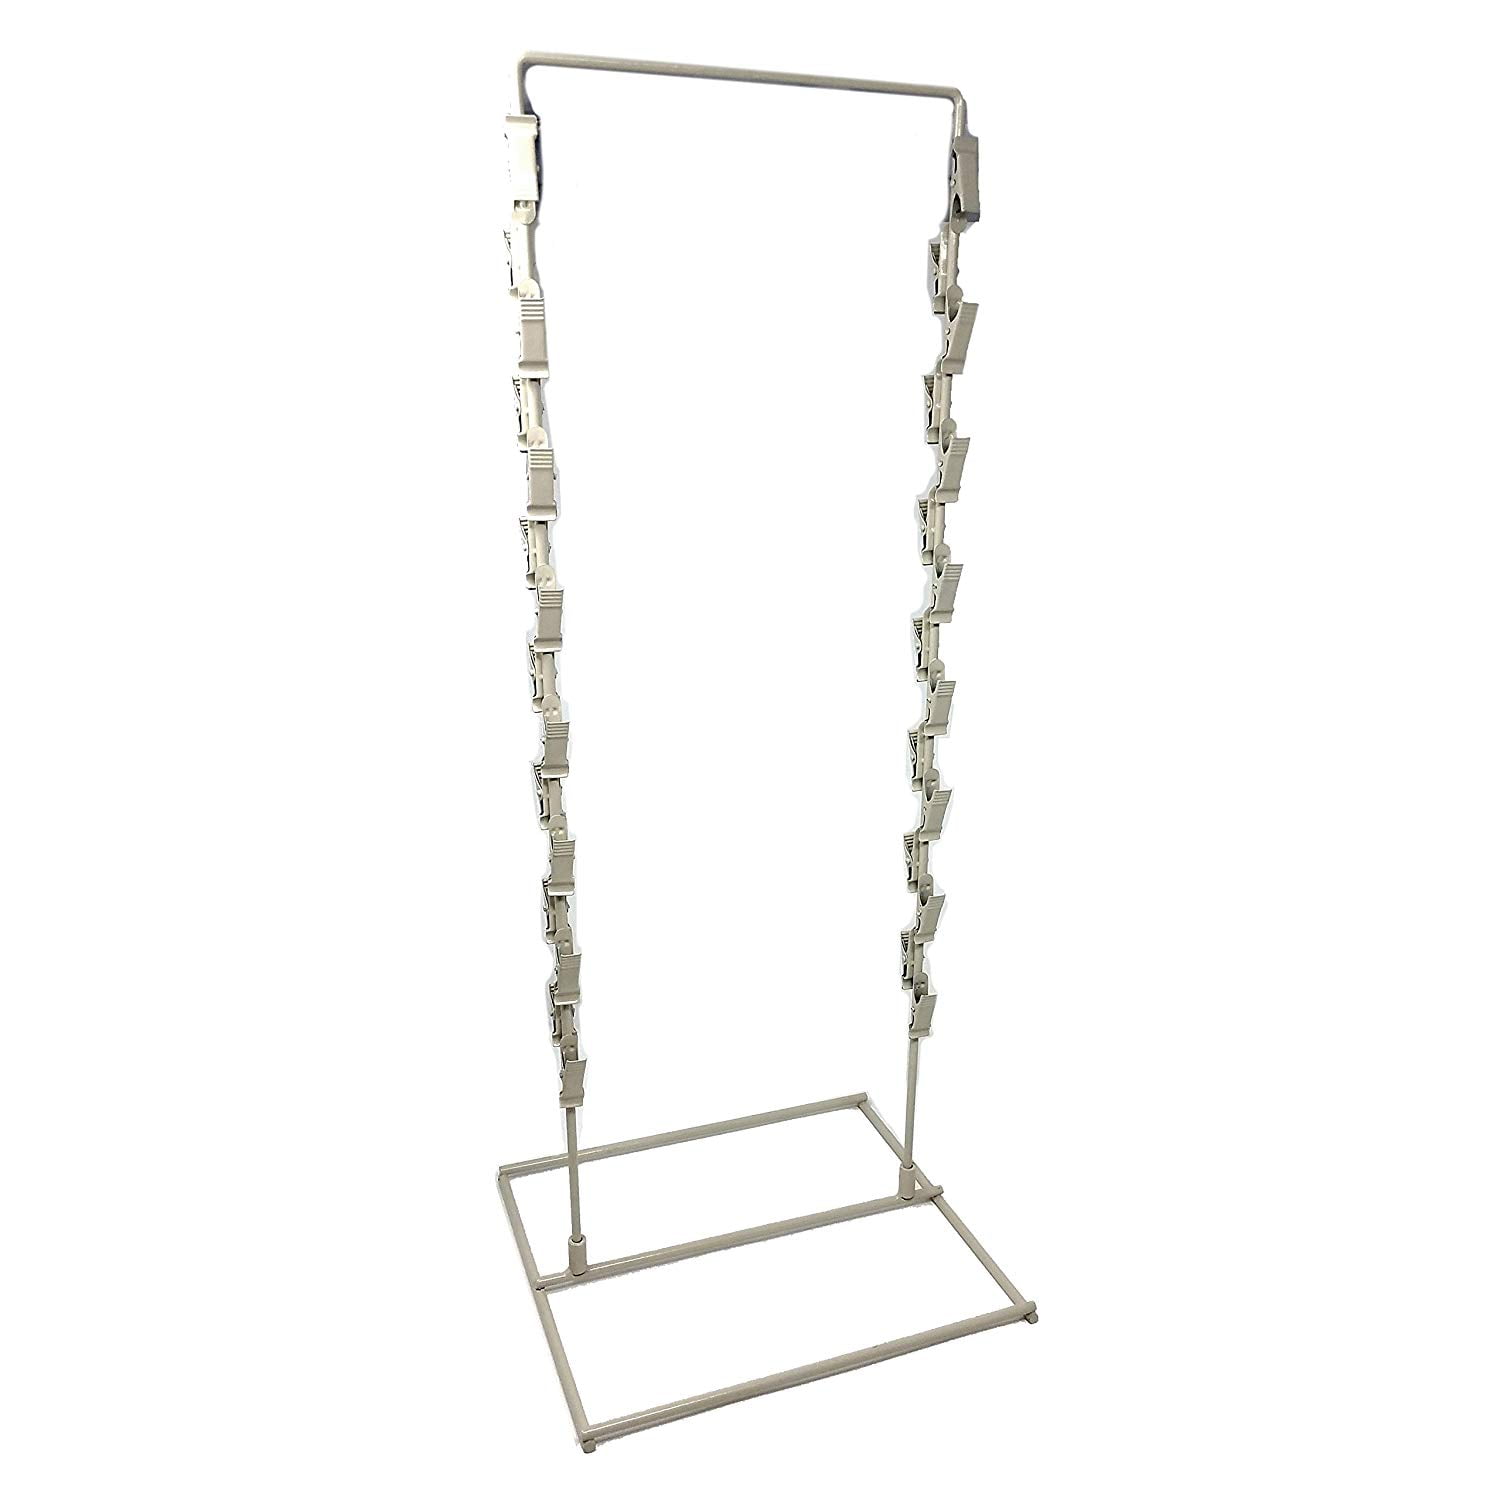 Details about   2 Units of 16 Inch Hanging Display Strip/Rack with 6 Clips for Chips Snacks,... 